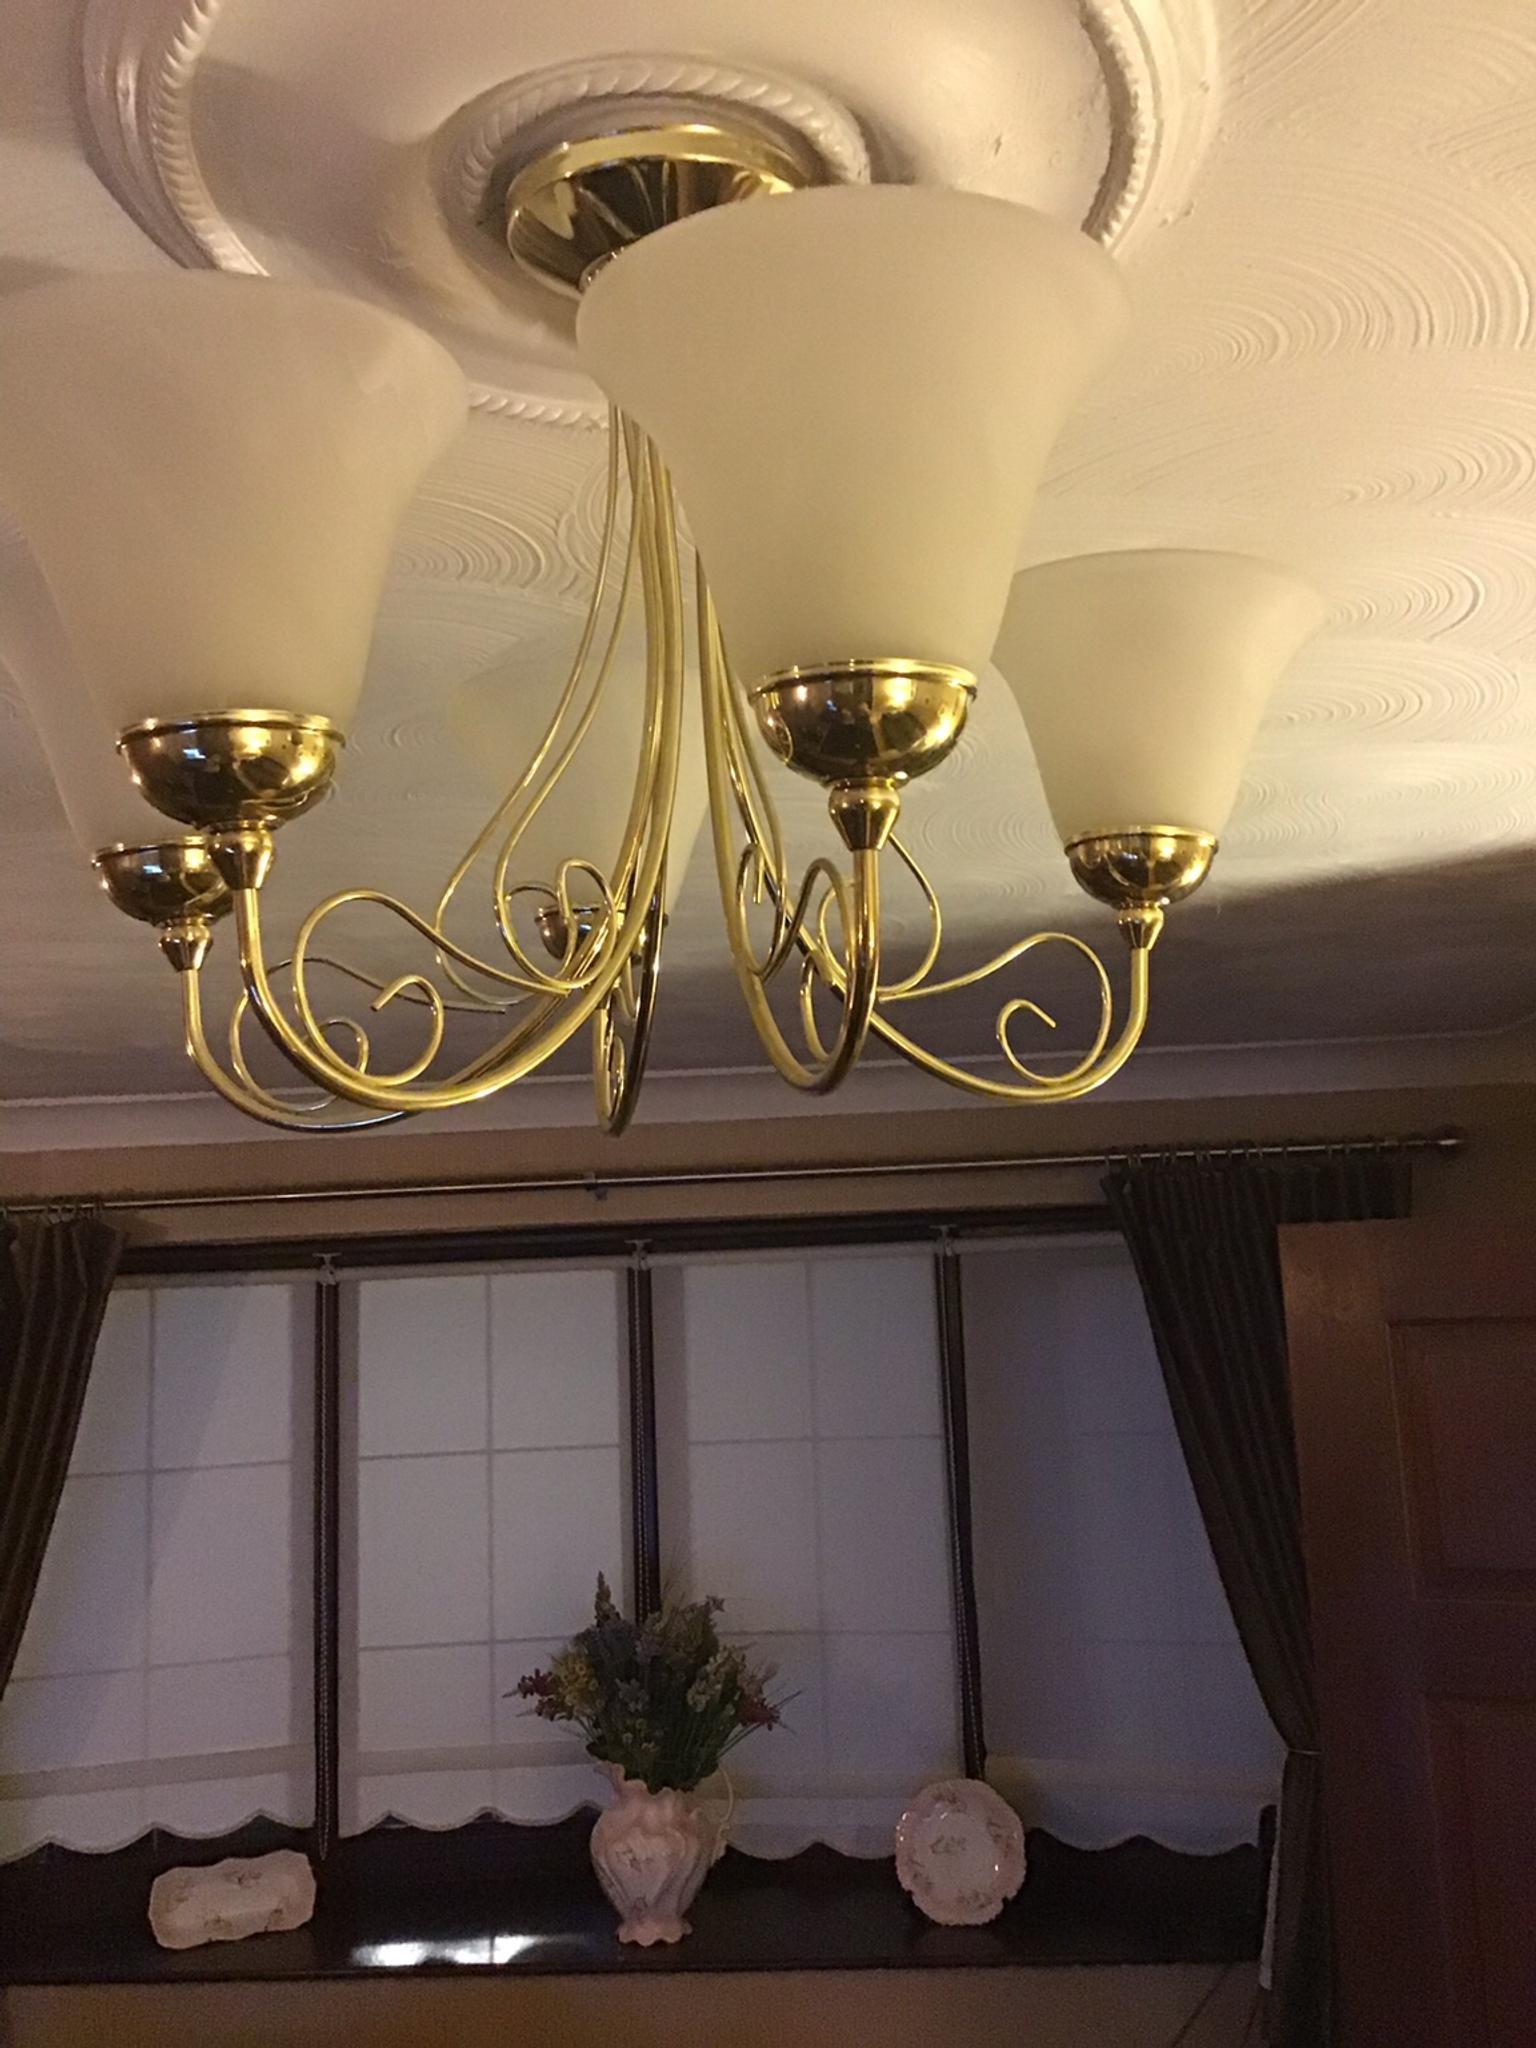 Ceiling Light In Wakefield For 10 00 For Sale Shpock